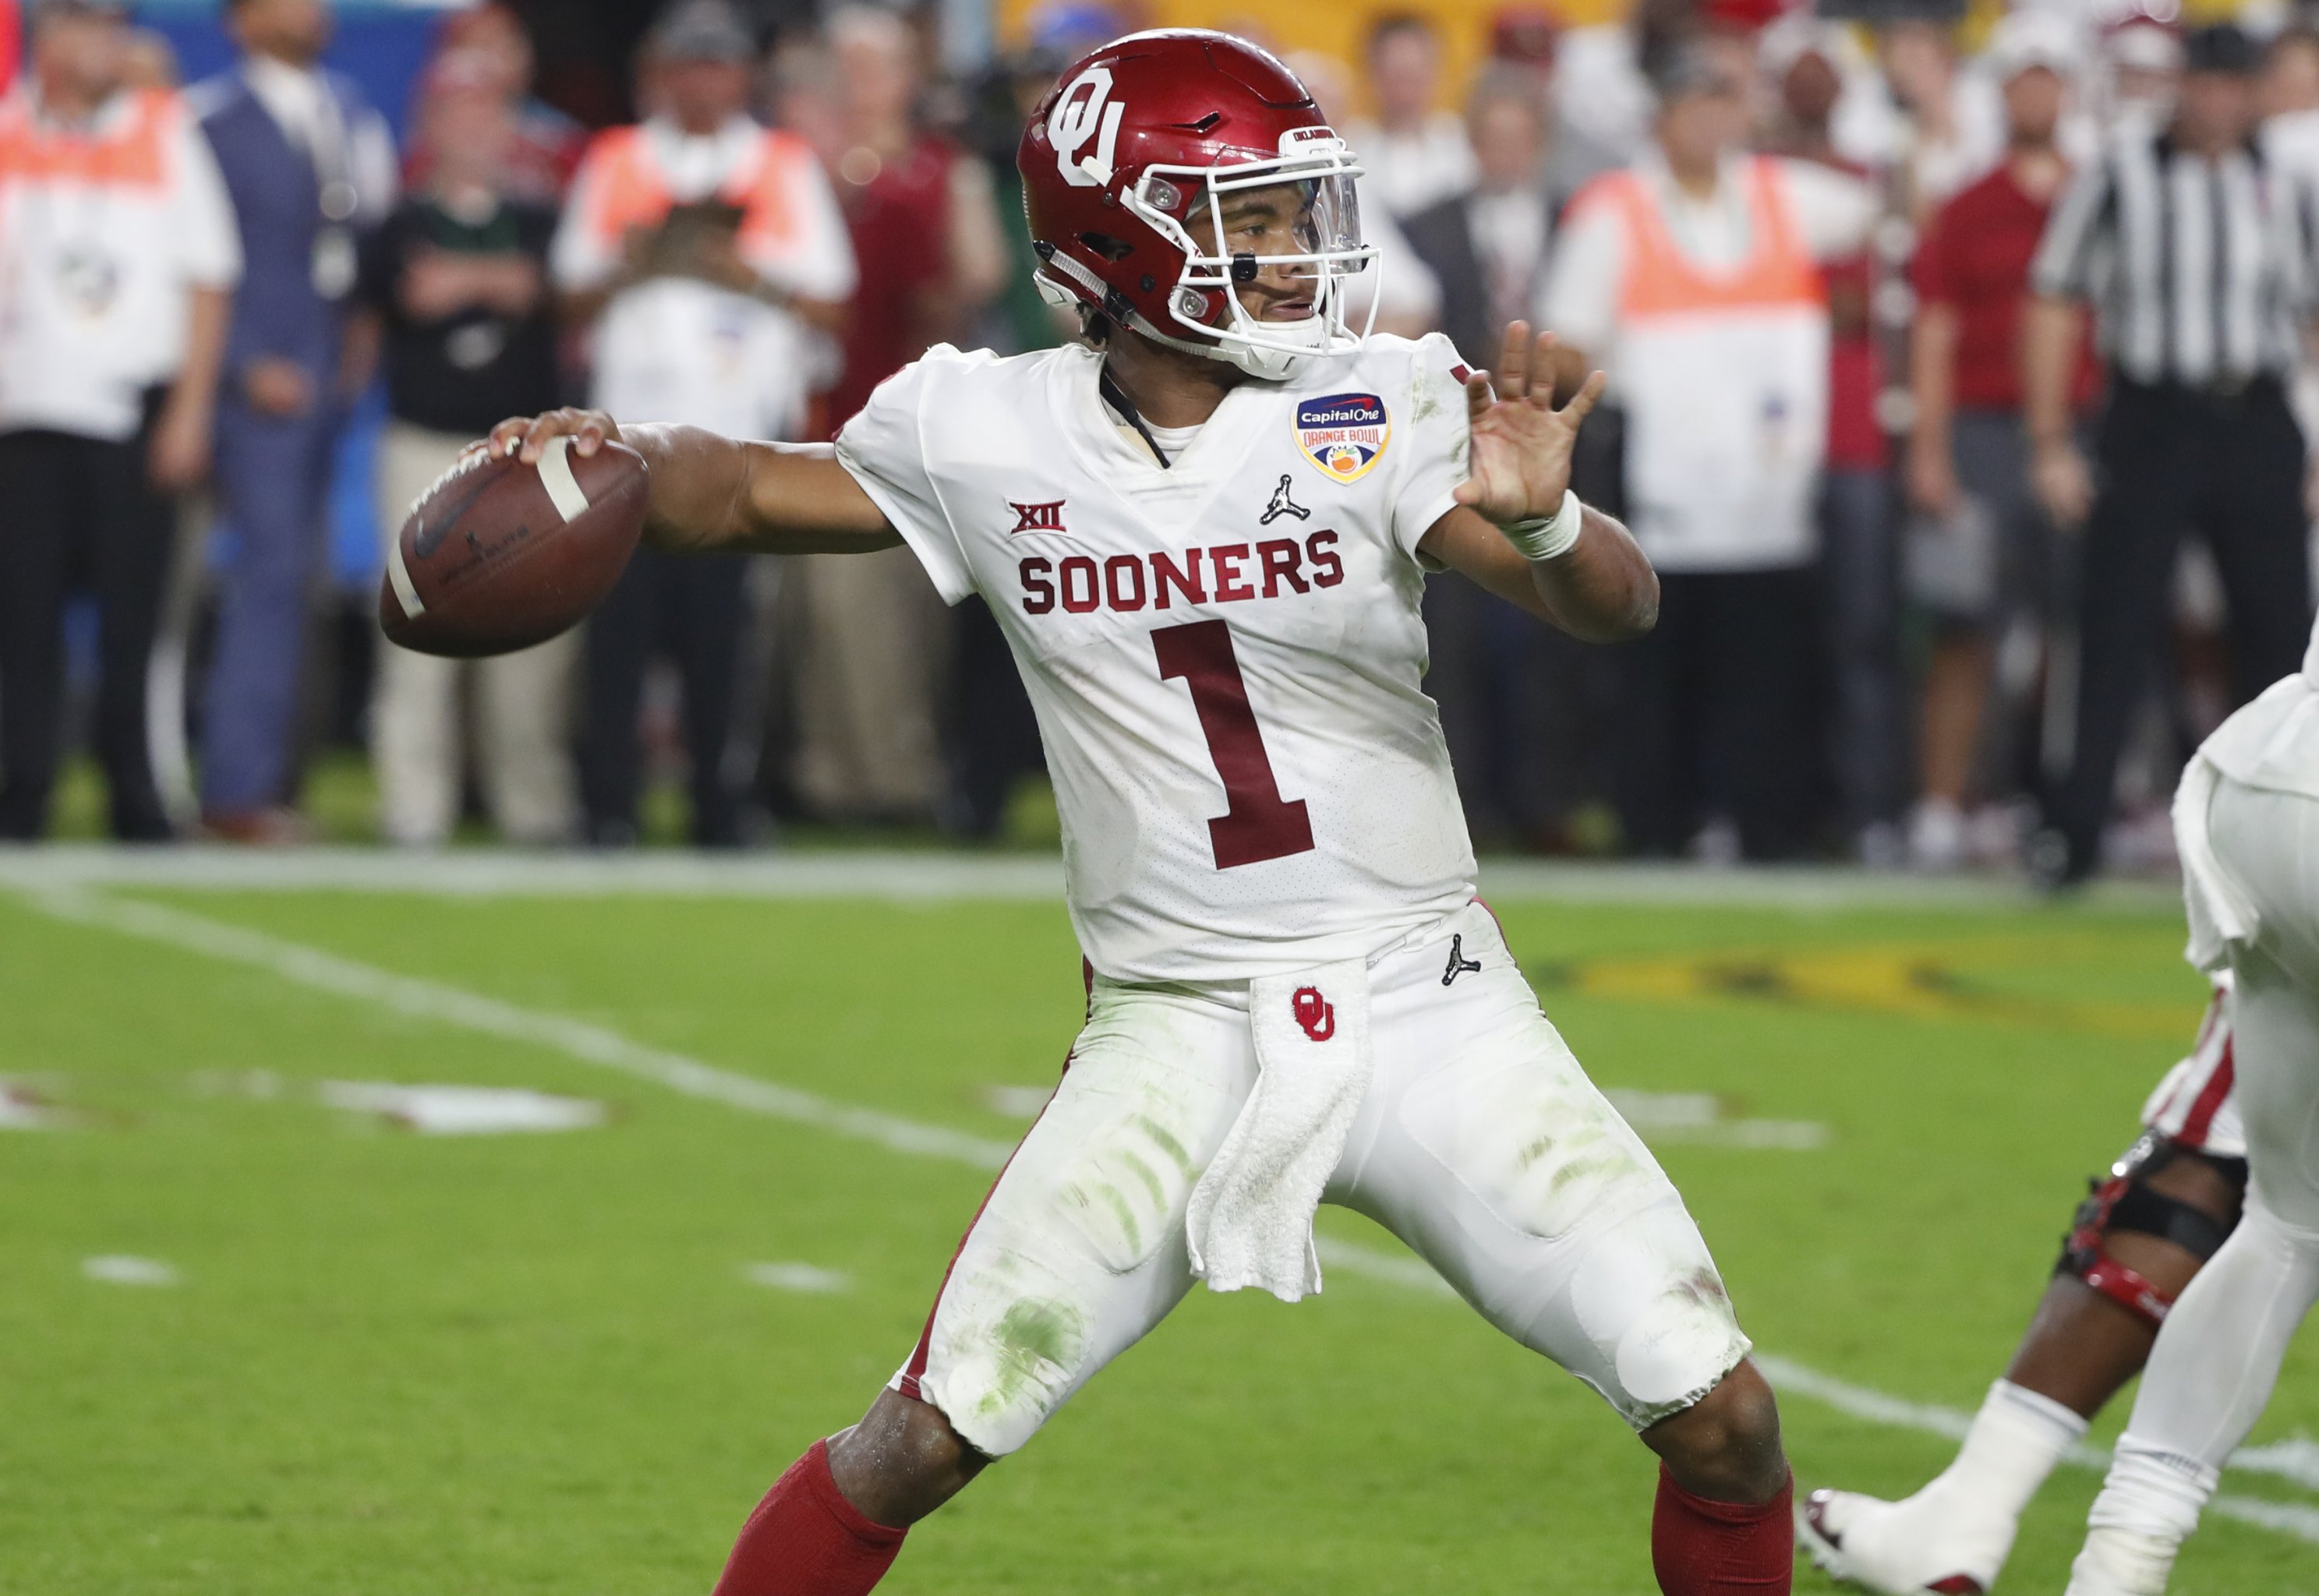 Kyler Murray declares for the NFL draft - Los Angeles Times